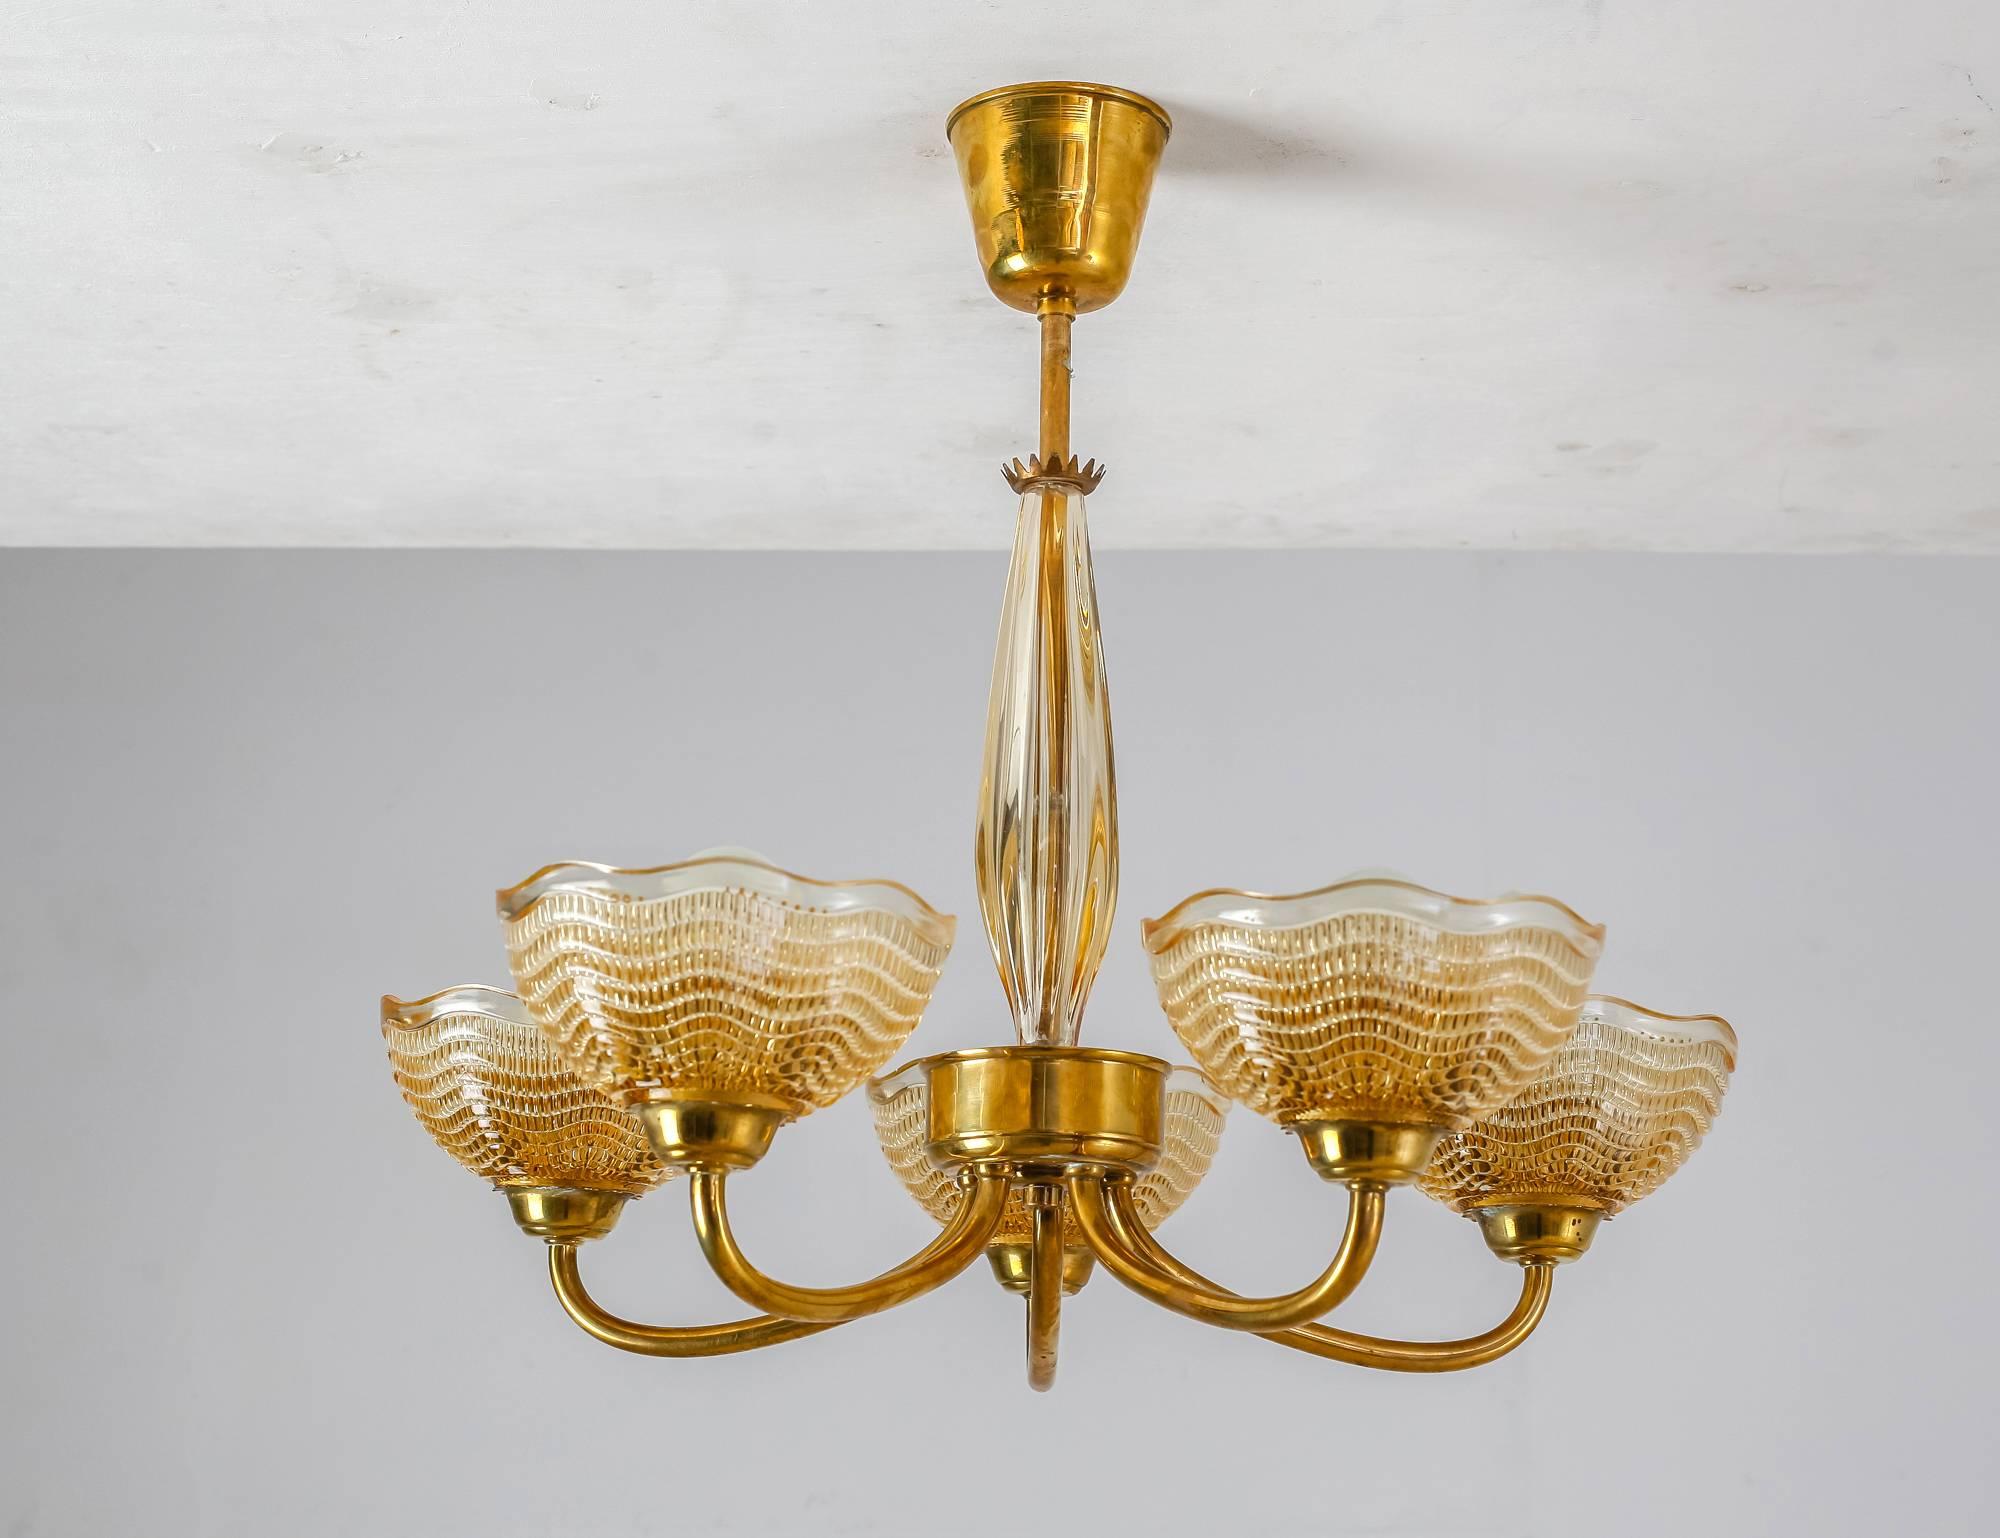 Scandinavian Modern Orrefors Brass and Yellow Glass Five-Arm Chandelier, Sweden, 1940s For Sale